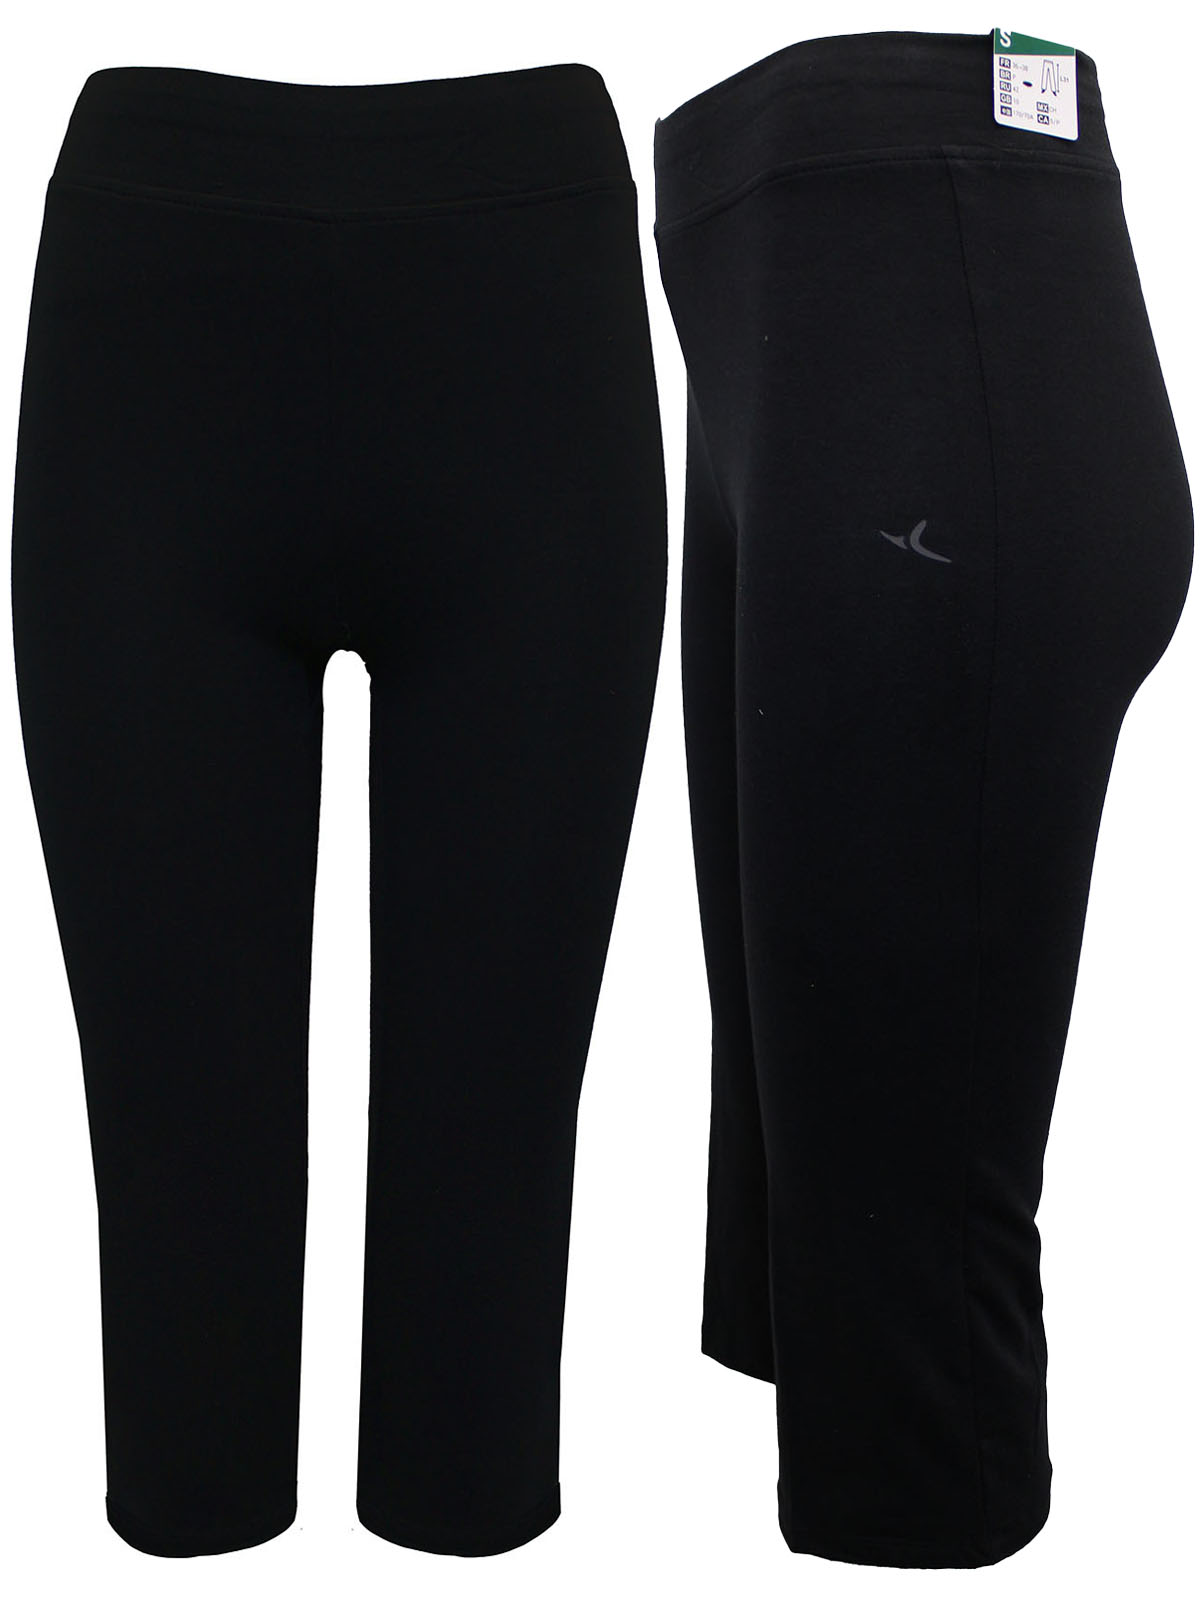 Fitness Stretch Cotton Leggings with Adjustable Length - Decathlon